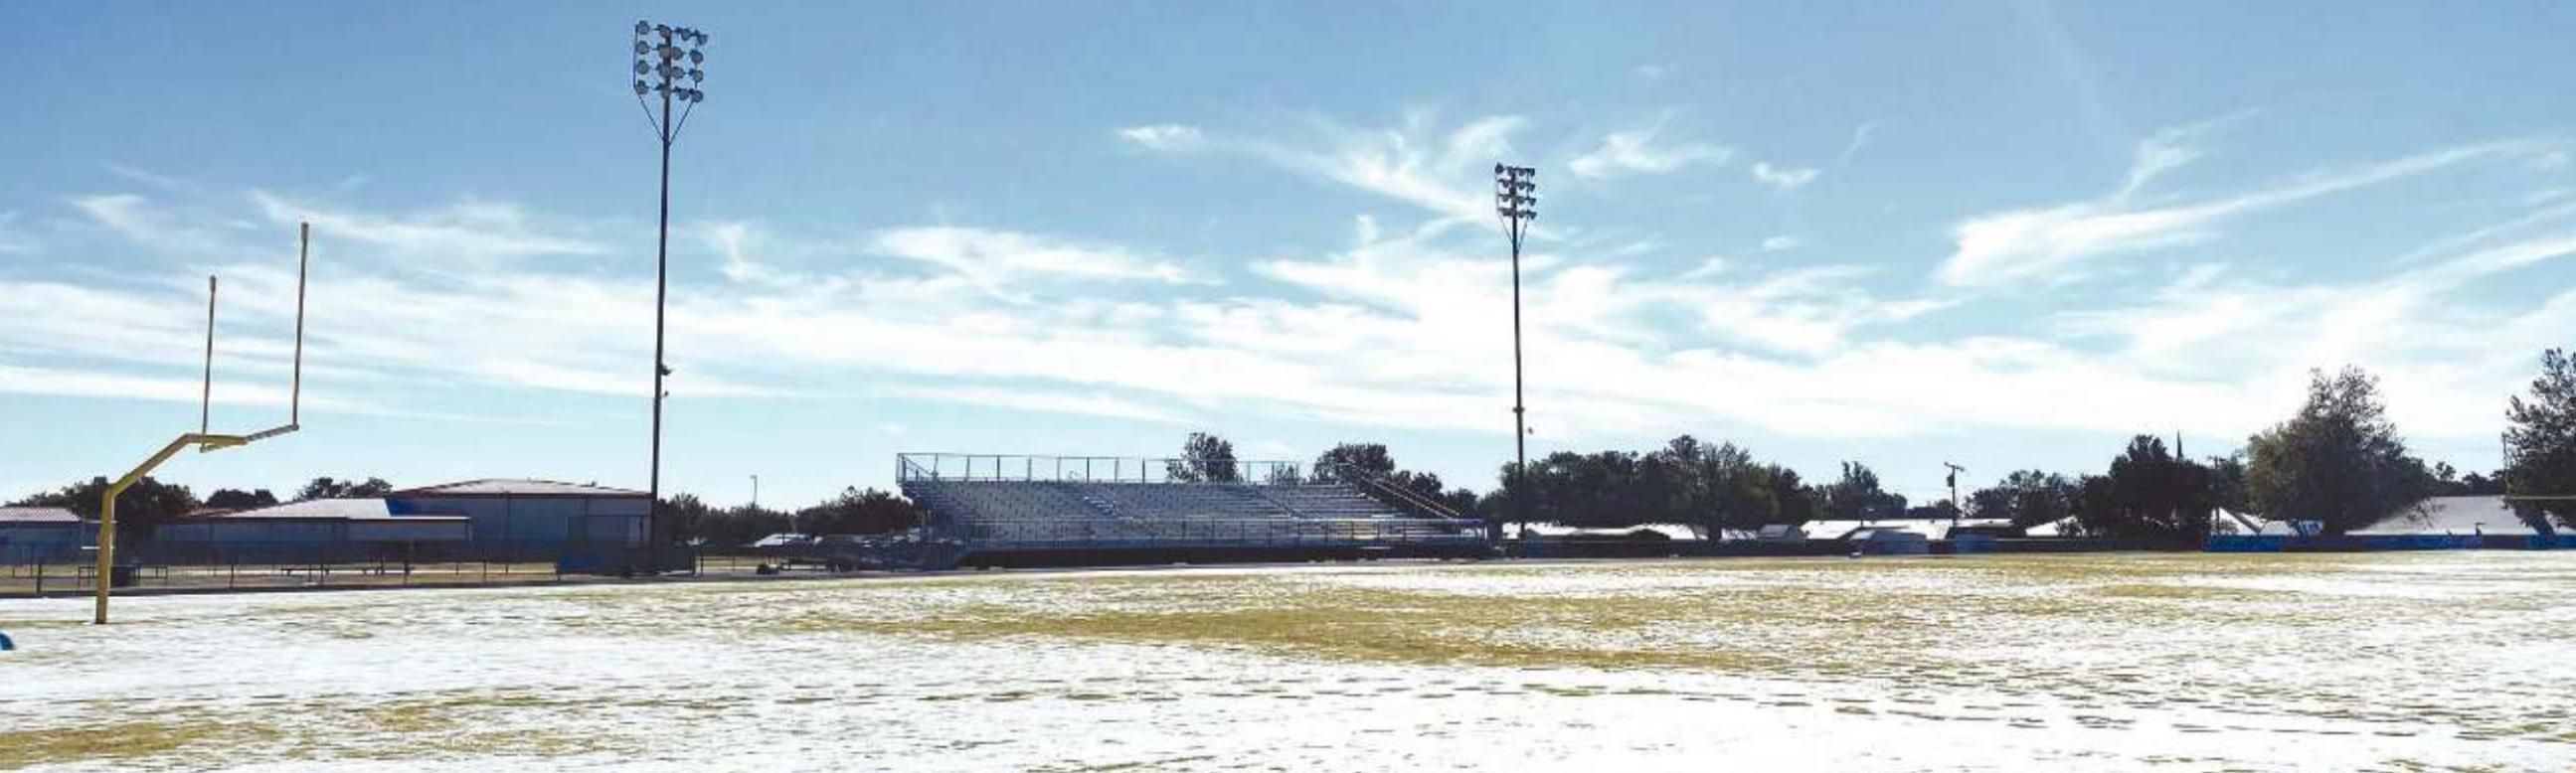 Weatherford’s football field is under partial snow/ice cover Thursday. Coach Reagan Roof says plans call for the game to be played as scheduled Friday in Weatherford. Josh Jennings/WDN